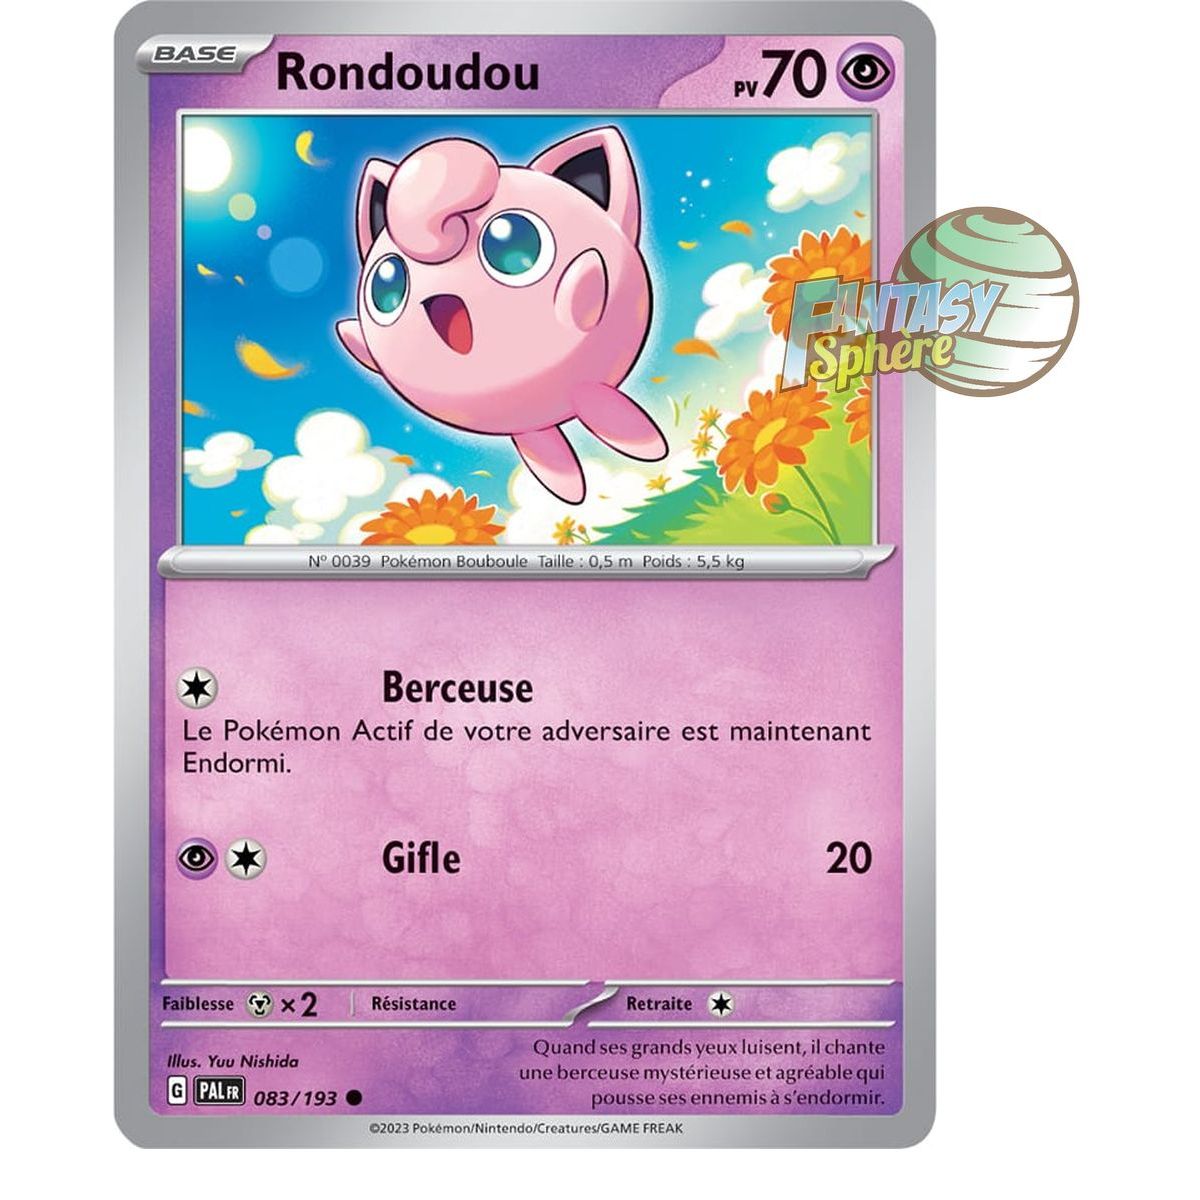 Jigglypuff - Municipality 83/193 - Scarlet and Violet Evolution in Paldea